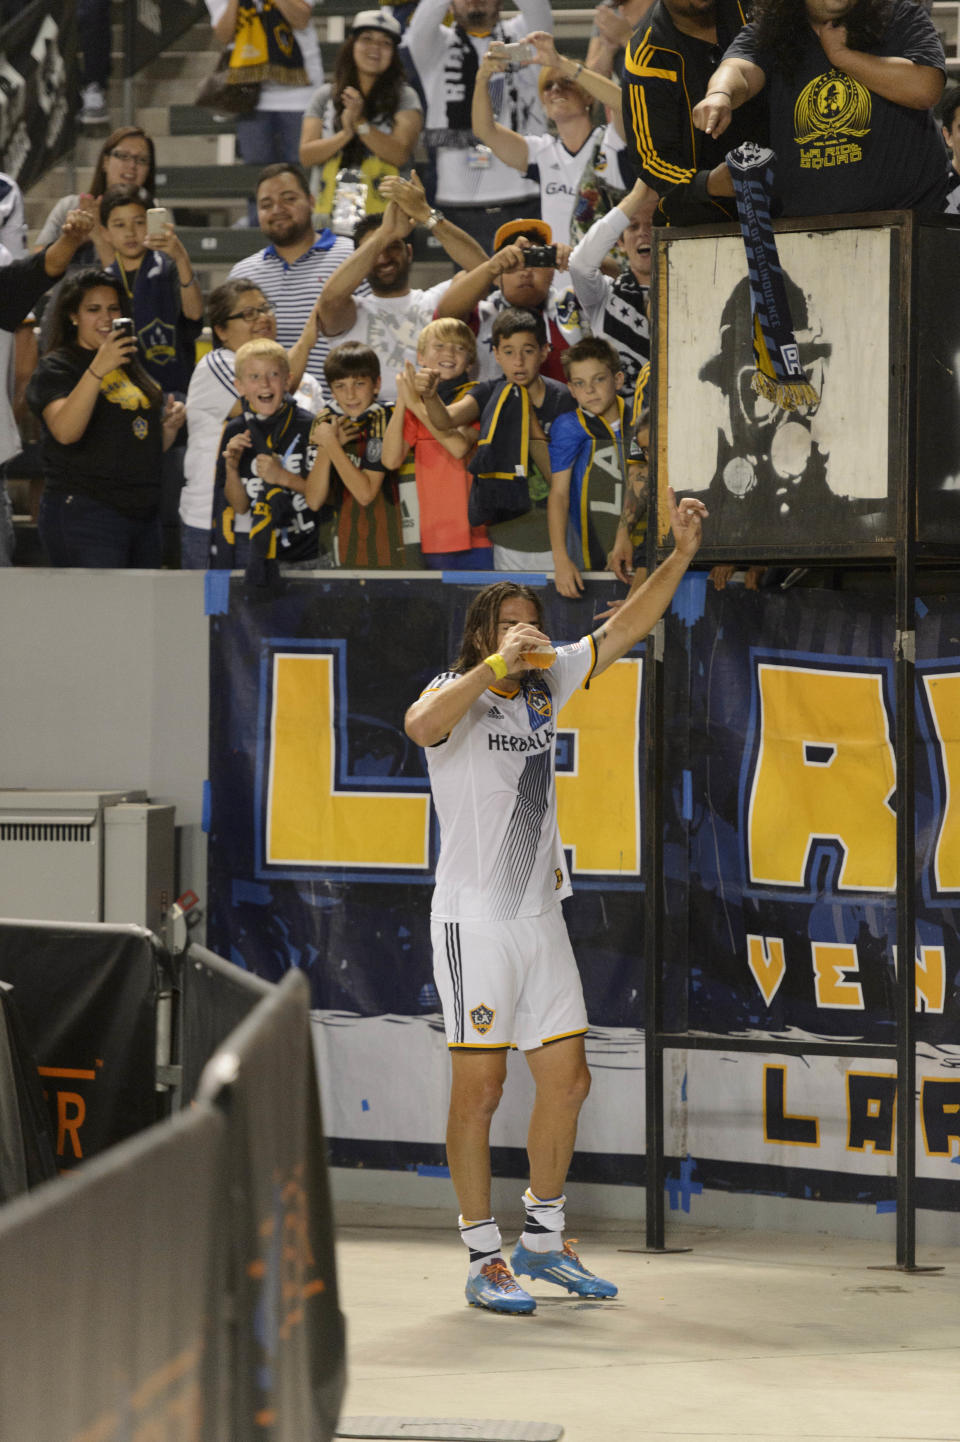 LA Galaxy forward Alan Gordon drinks a beer with fans after the game against Toronto FC. (Kelvin Kuo-USA TODAY Sports)